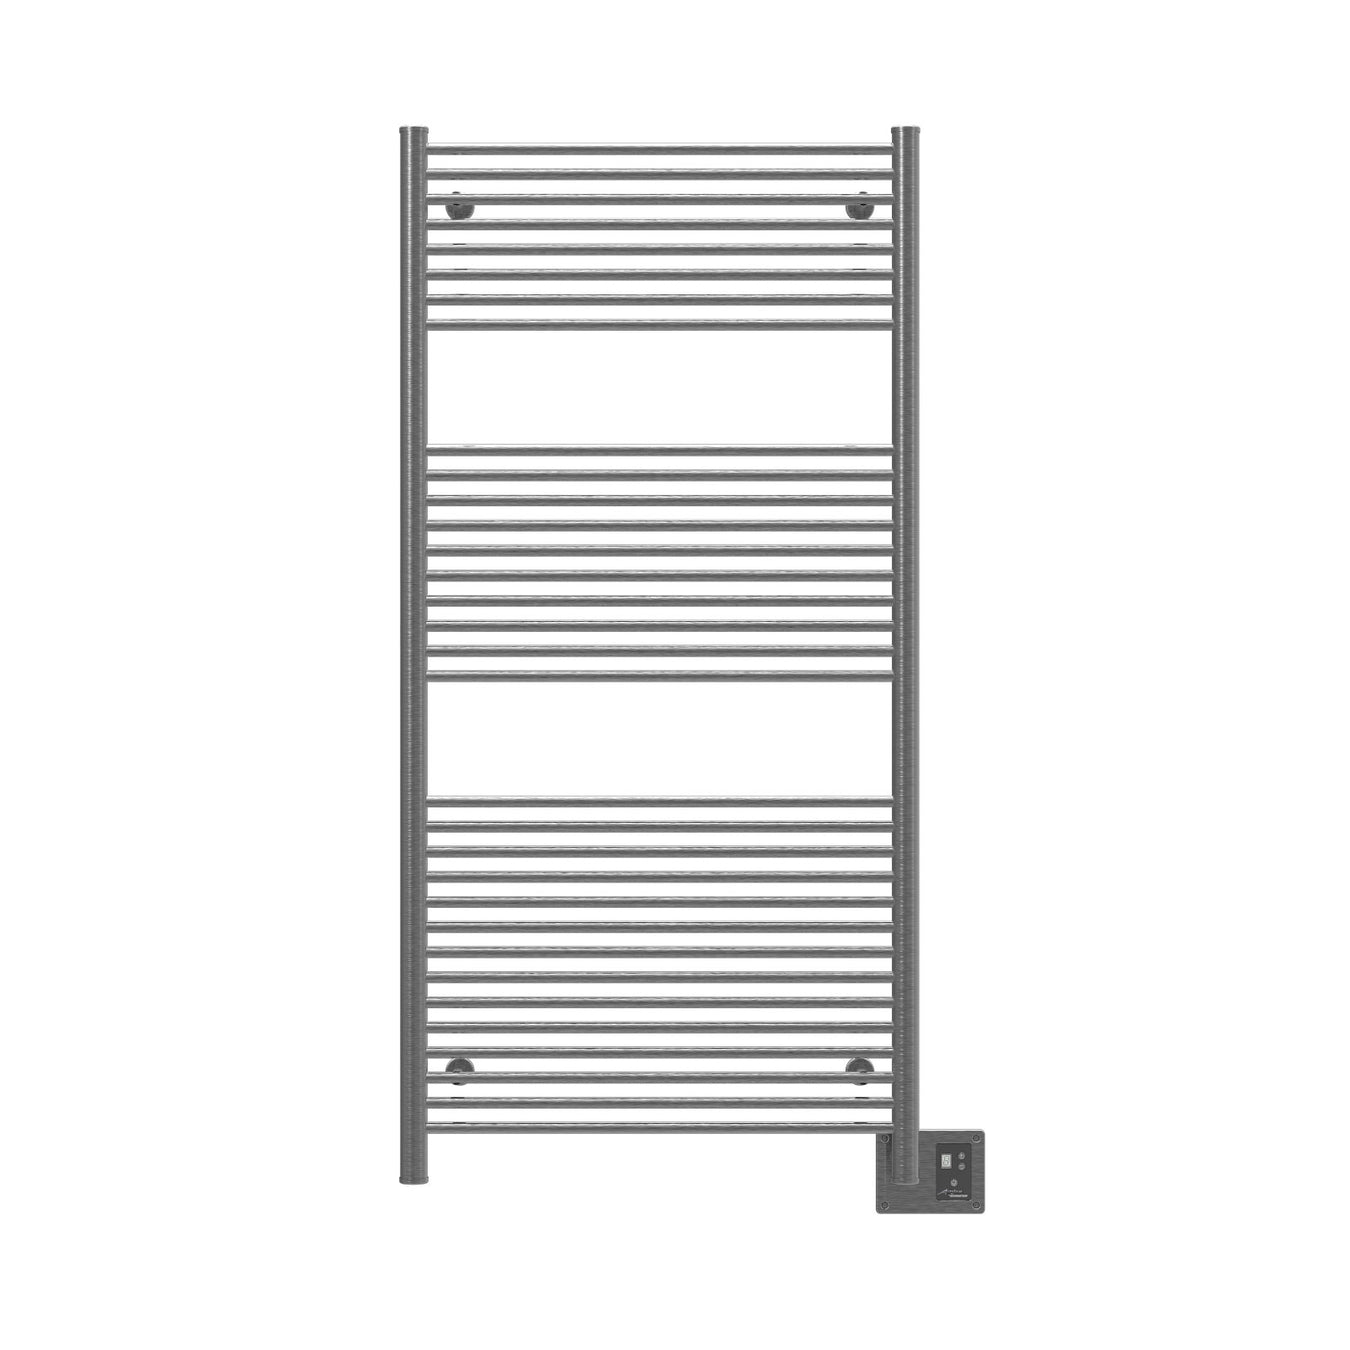 Amba Products Antus Collection A2856 Towel Warmers